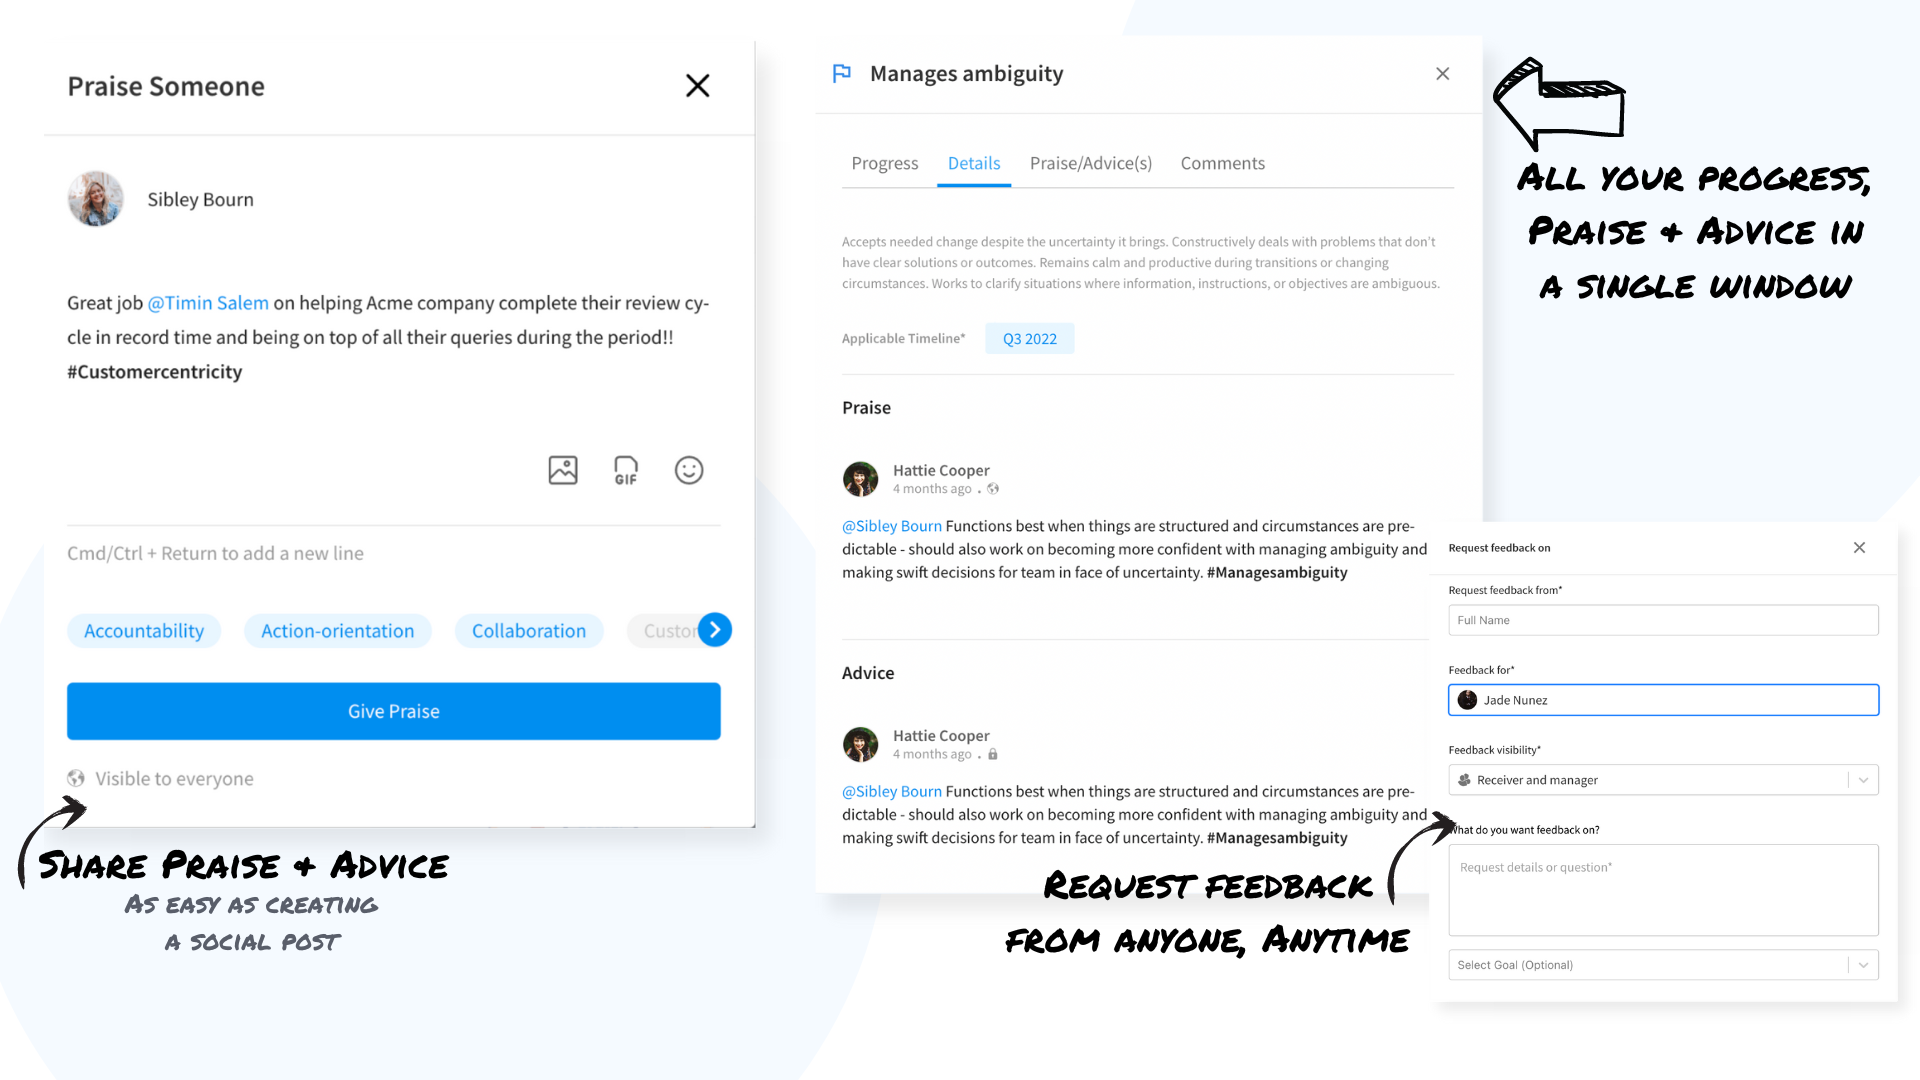 Sharing feedback is now as easy as creating a social post where you can seek advice or receive praise from anyone, anytime instantaneously in real-time. 